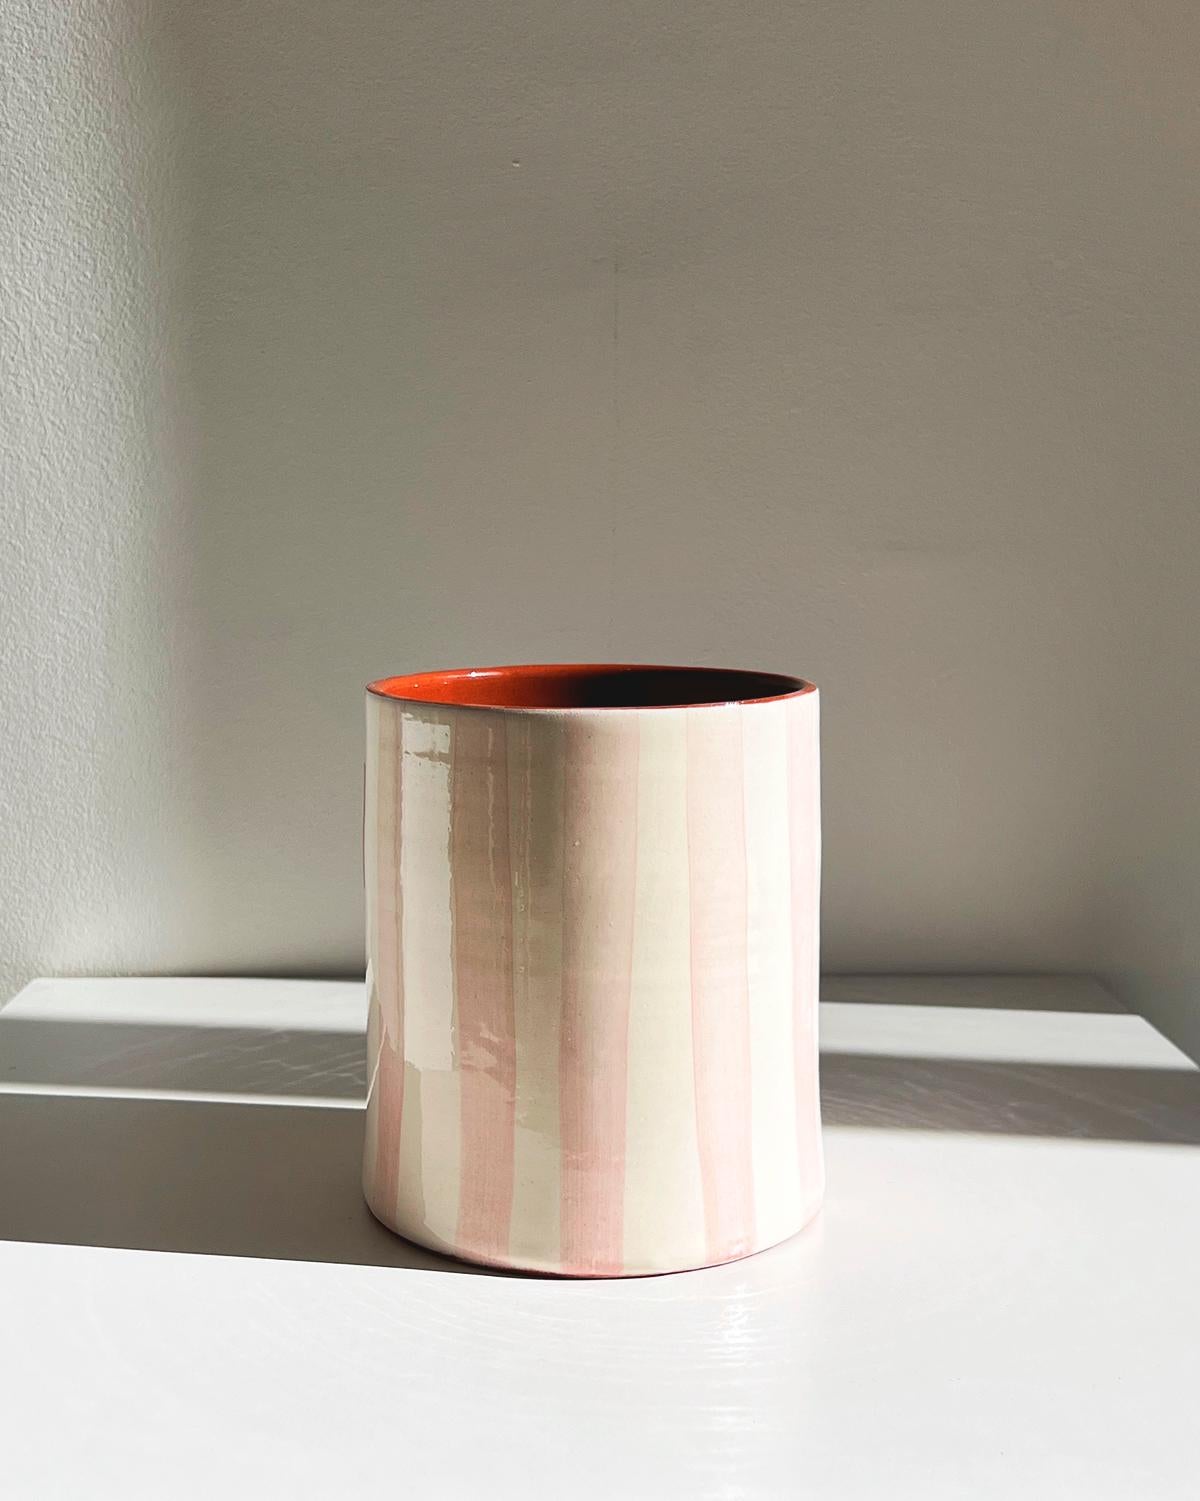 A unique vase for to beautify your home
This Casa Cubista vase is an artisanal piece of home decor made from terracotta with bold, white and gray stripes. Handcrafted in Europe, this fair trade and locally-sourced vase is the perfect addition to any